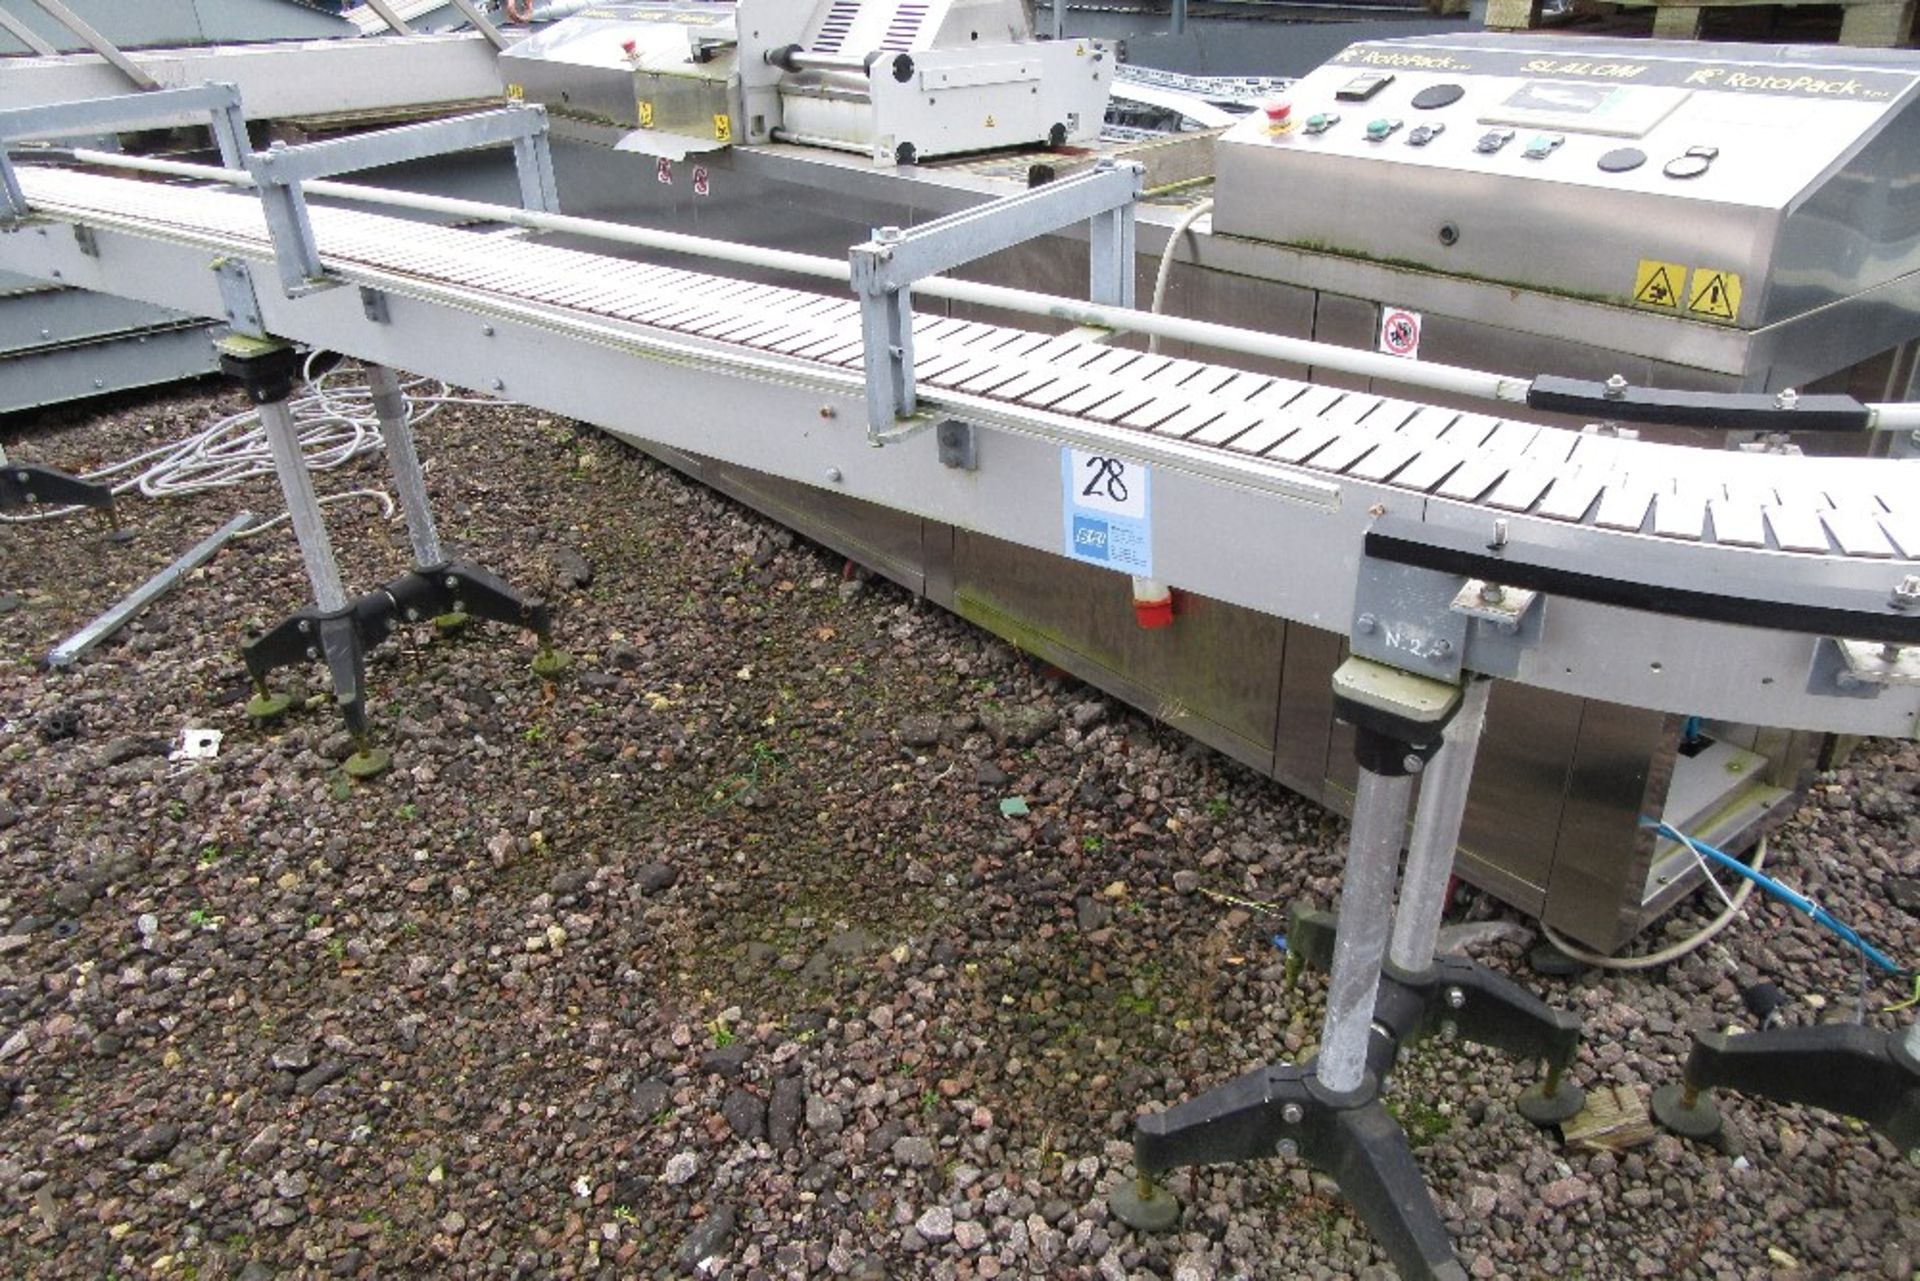 Stainless Steel 'S' Shape Slatted Conveyor, Approx: 5000 x 200mm - Image 3 of 3